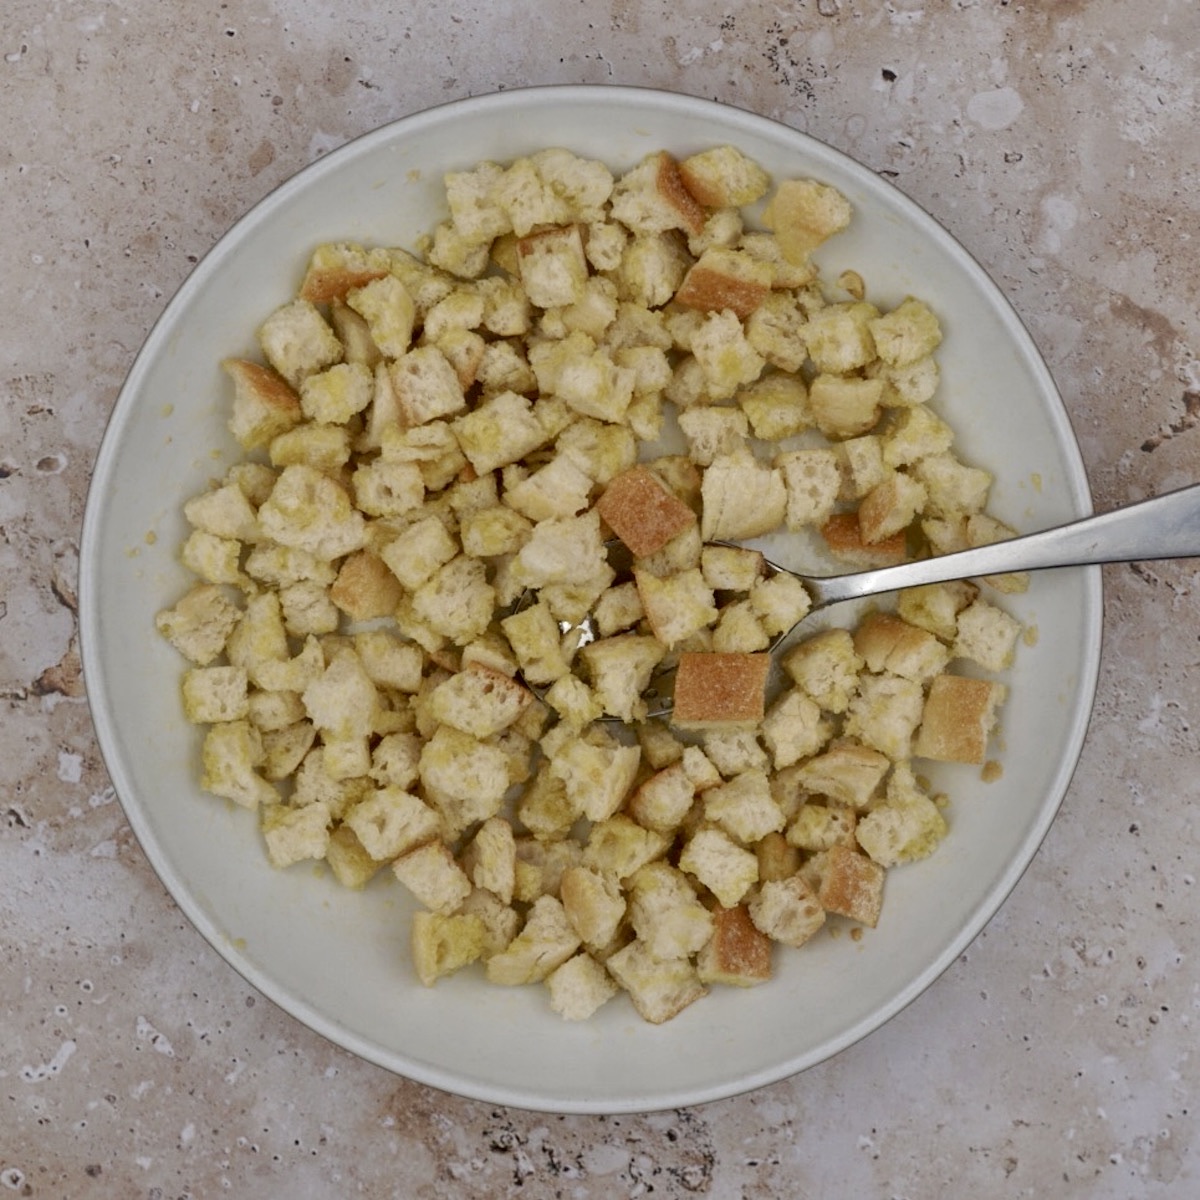 Unbaked croutons in a bowl